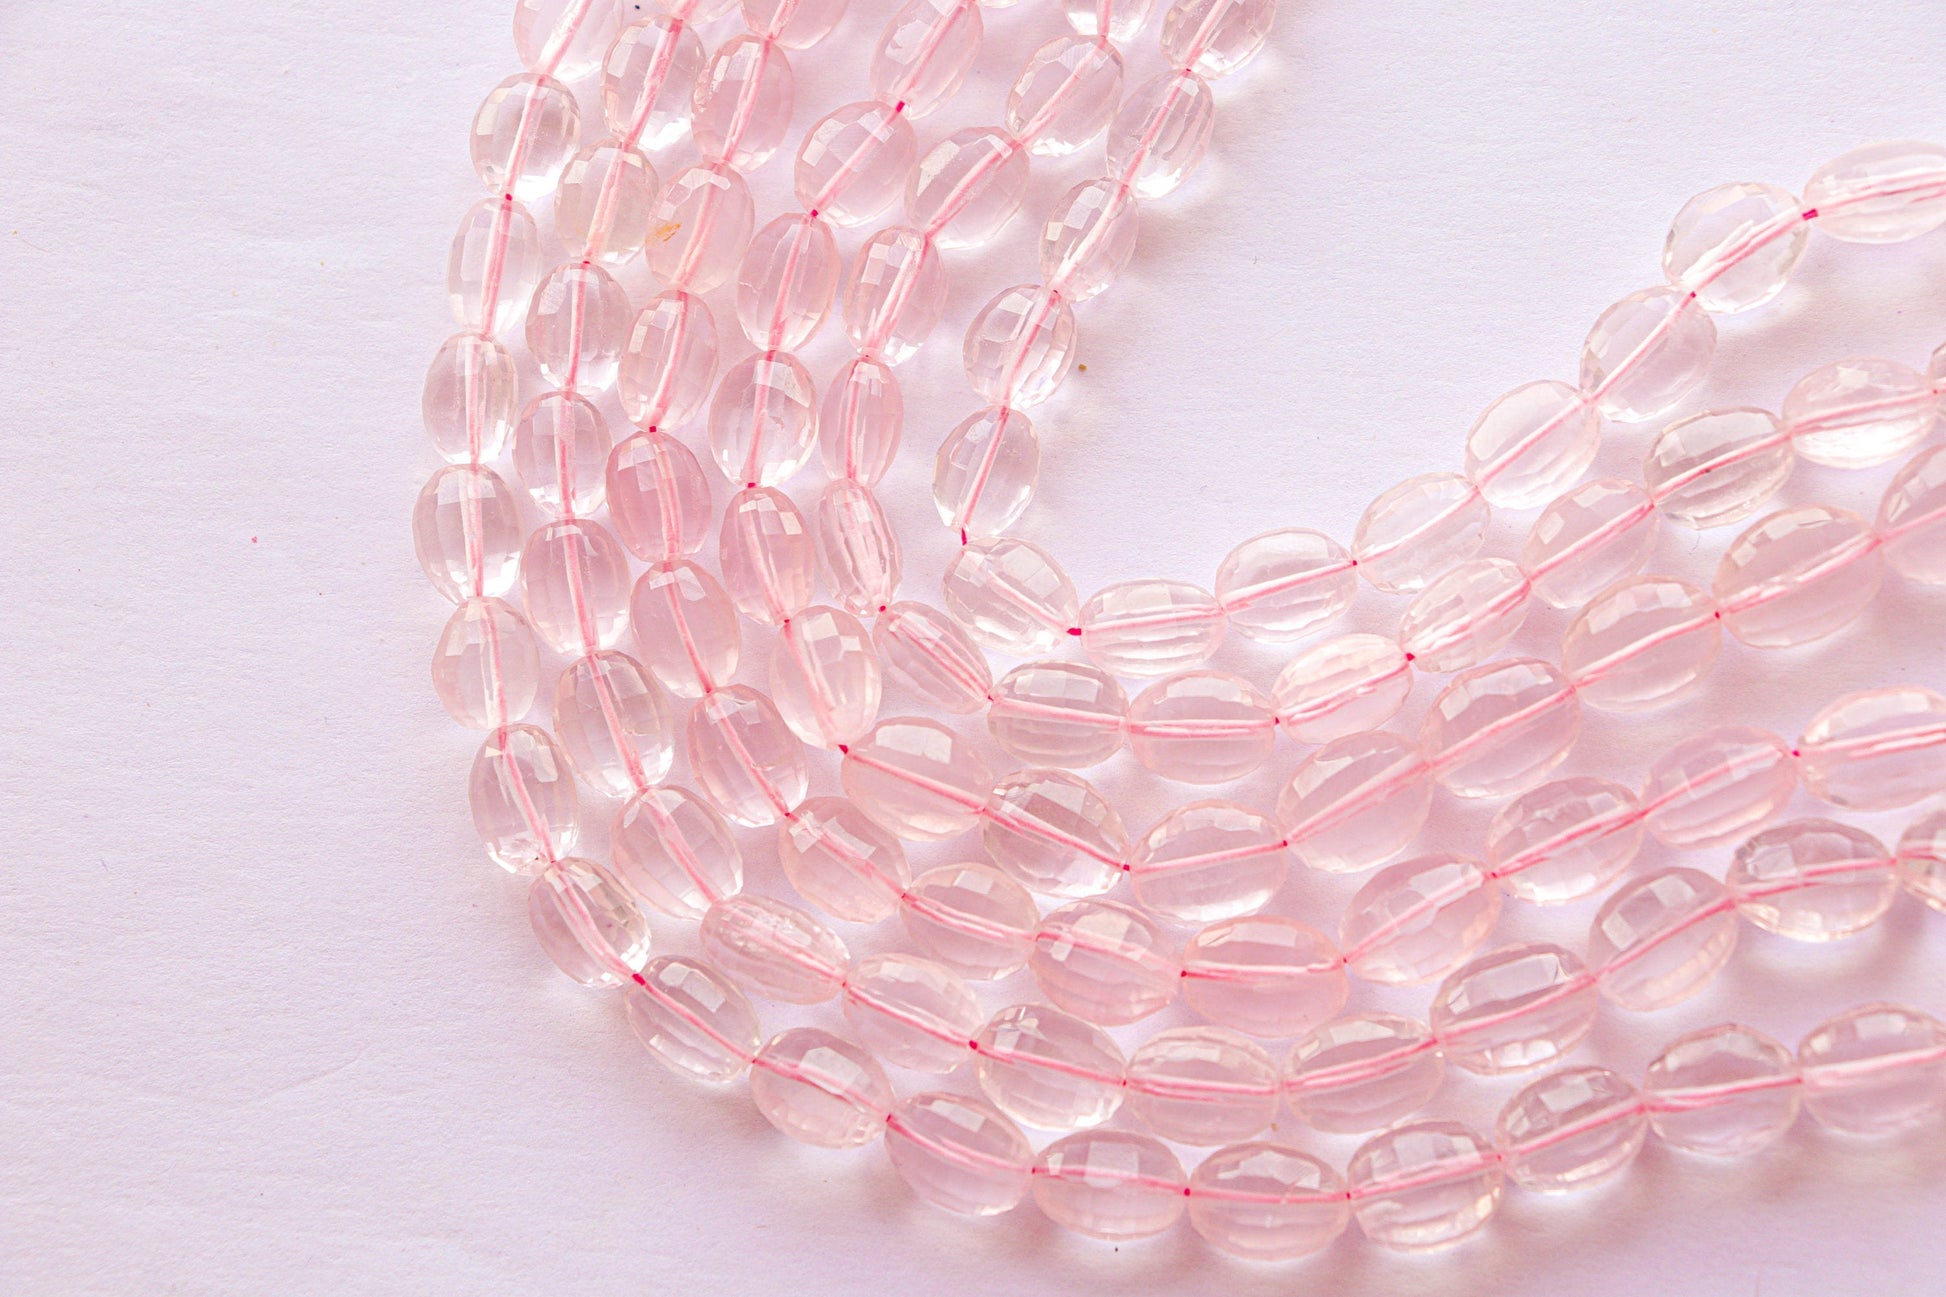 Rose Quartz Step cut Oval Shape Beads | 16 inch String | 6x9mm to 10x13mm | 40 Pieces | Center drill | Natural Gemstone Beads Beadsforyourjewelry